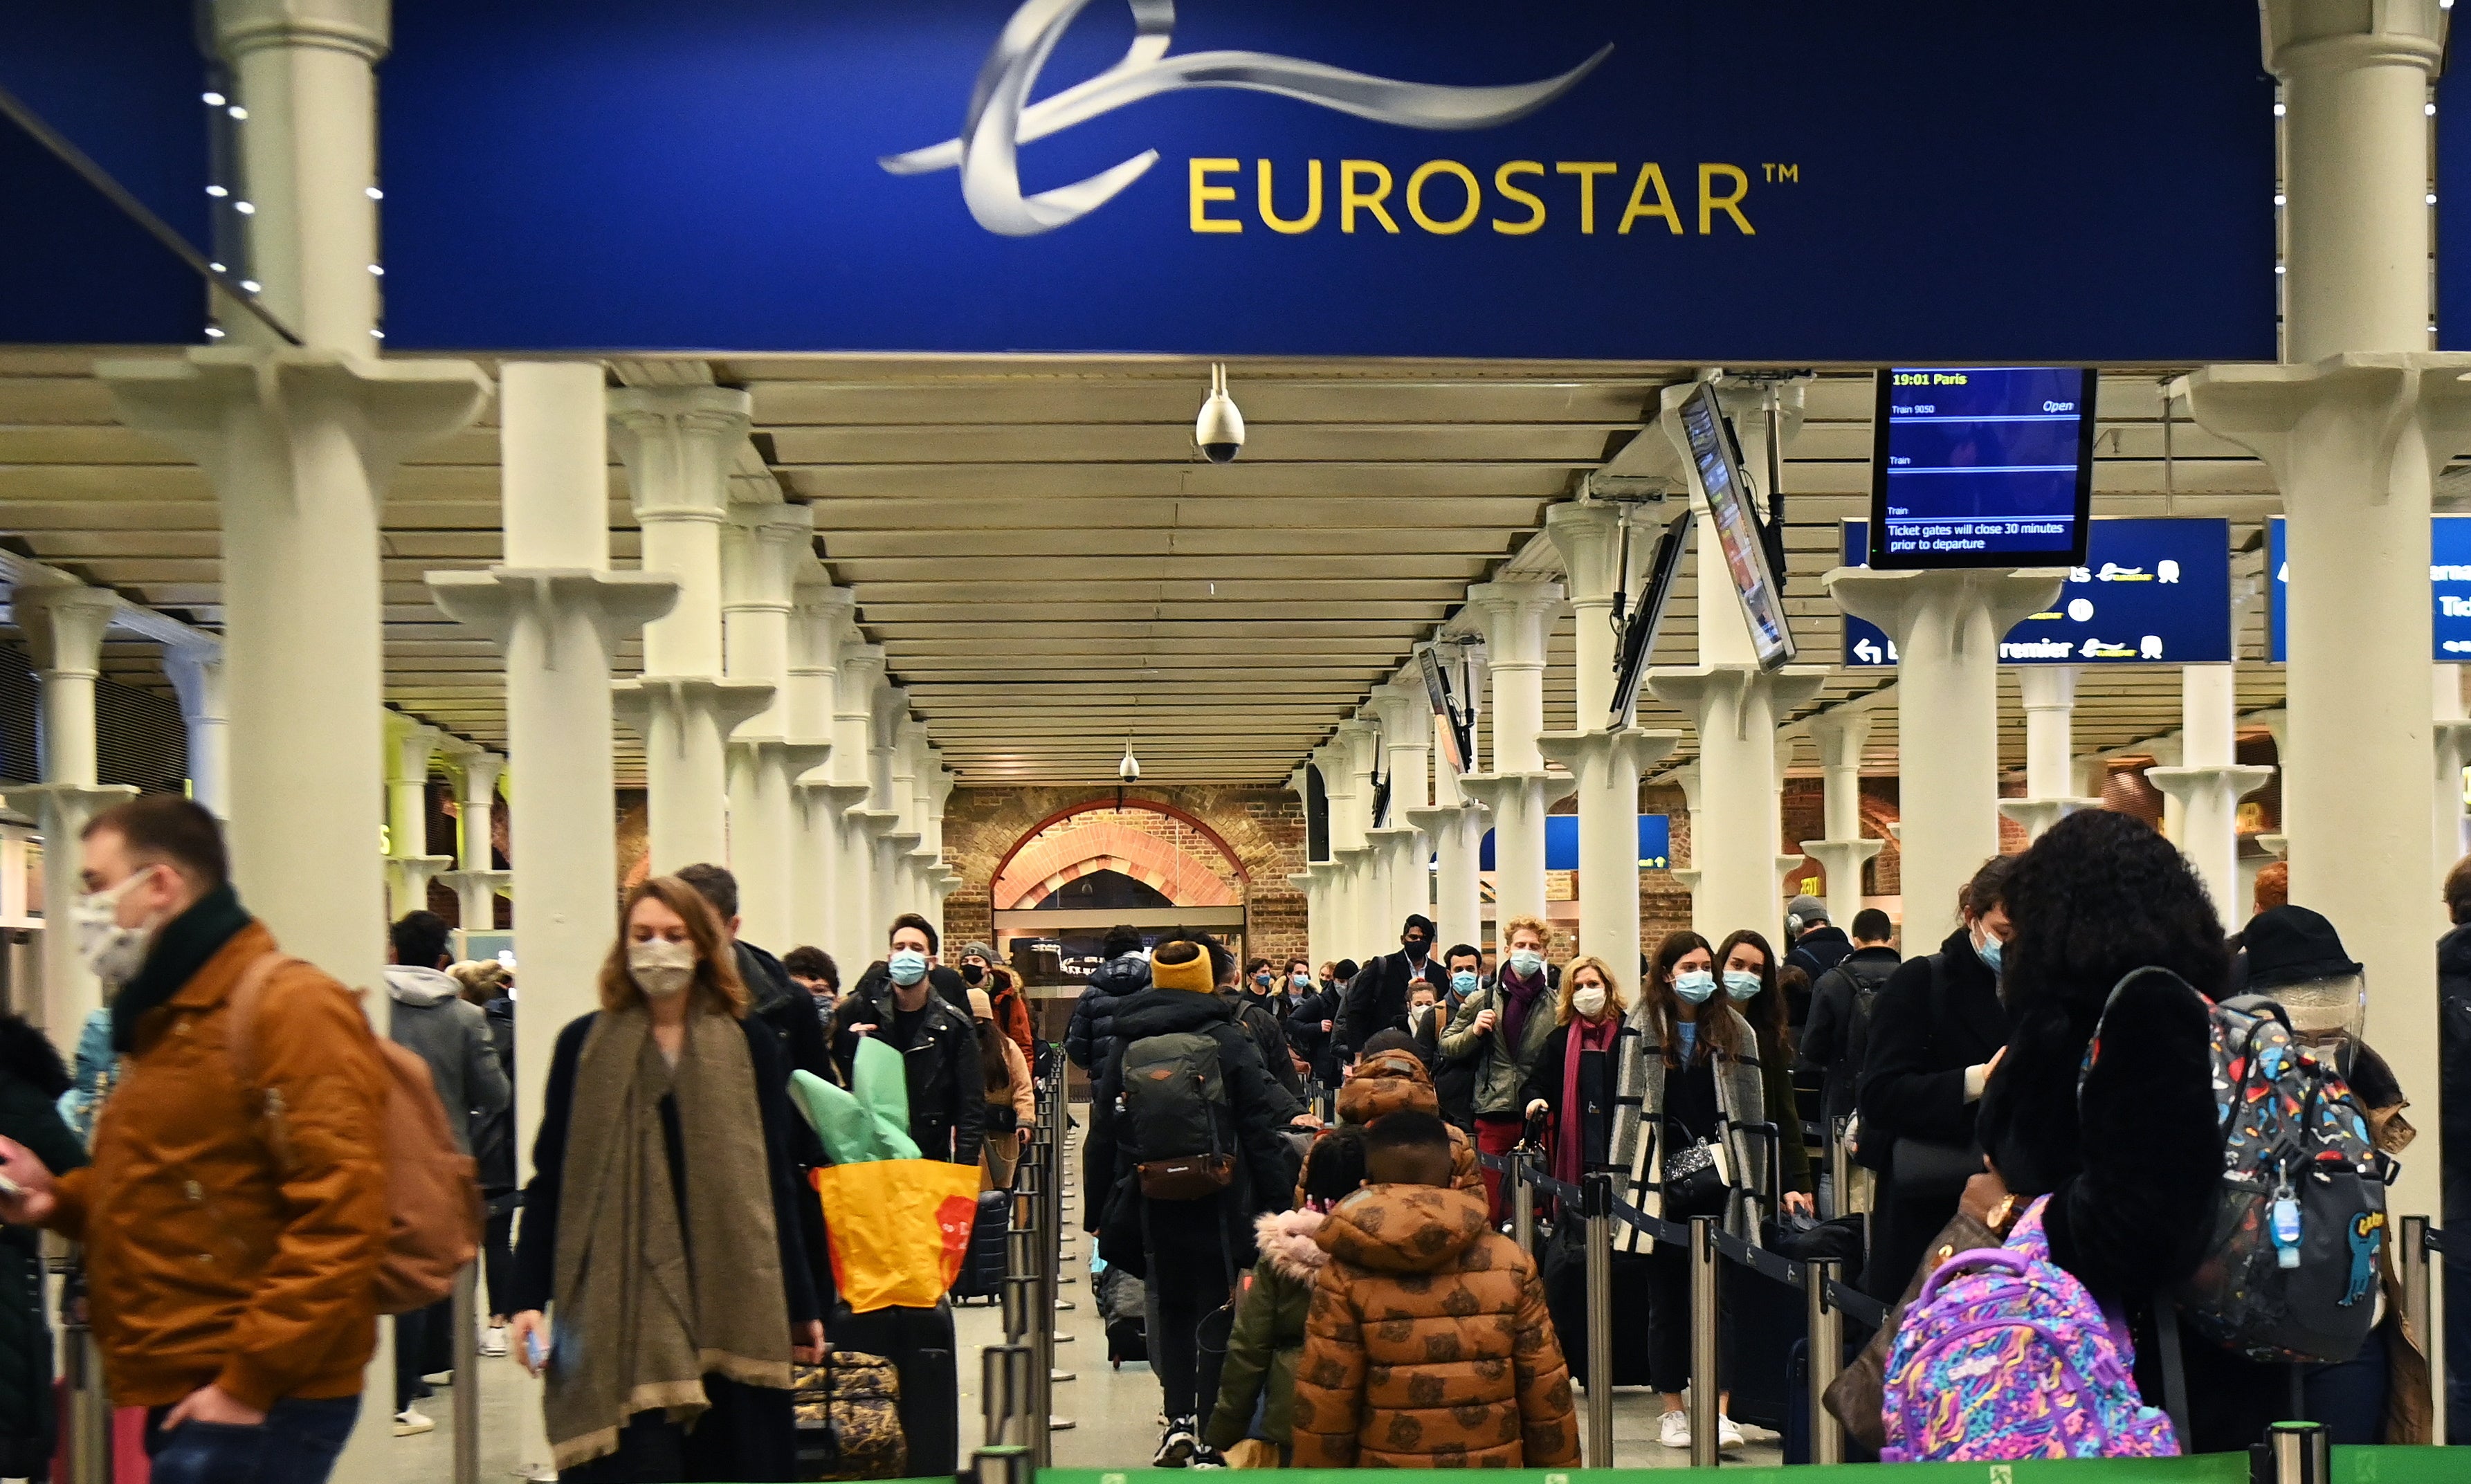 Passengers queue to board the Eurostar to Paris from Kings Cross St Pancras, shortly before France shuts its border to the UK at midnight on 20 December, 2020.